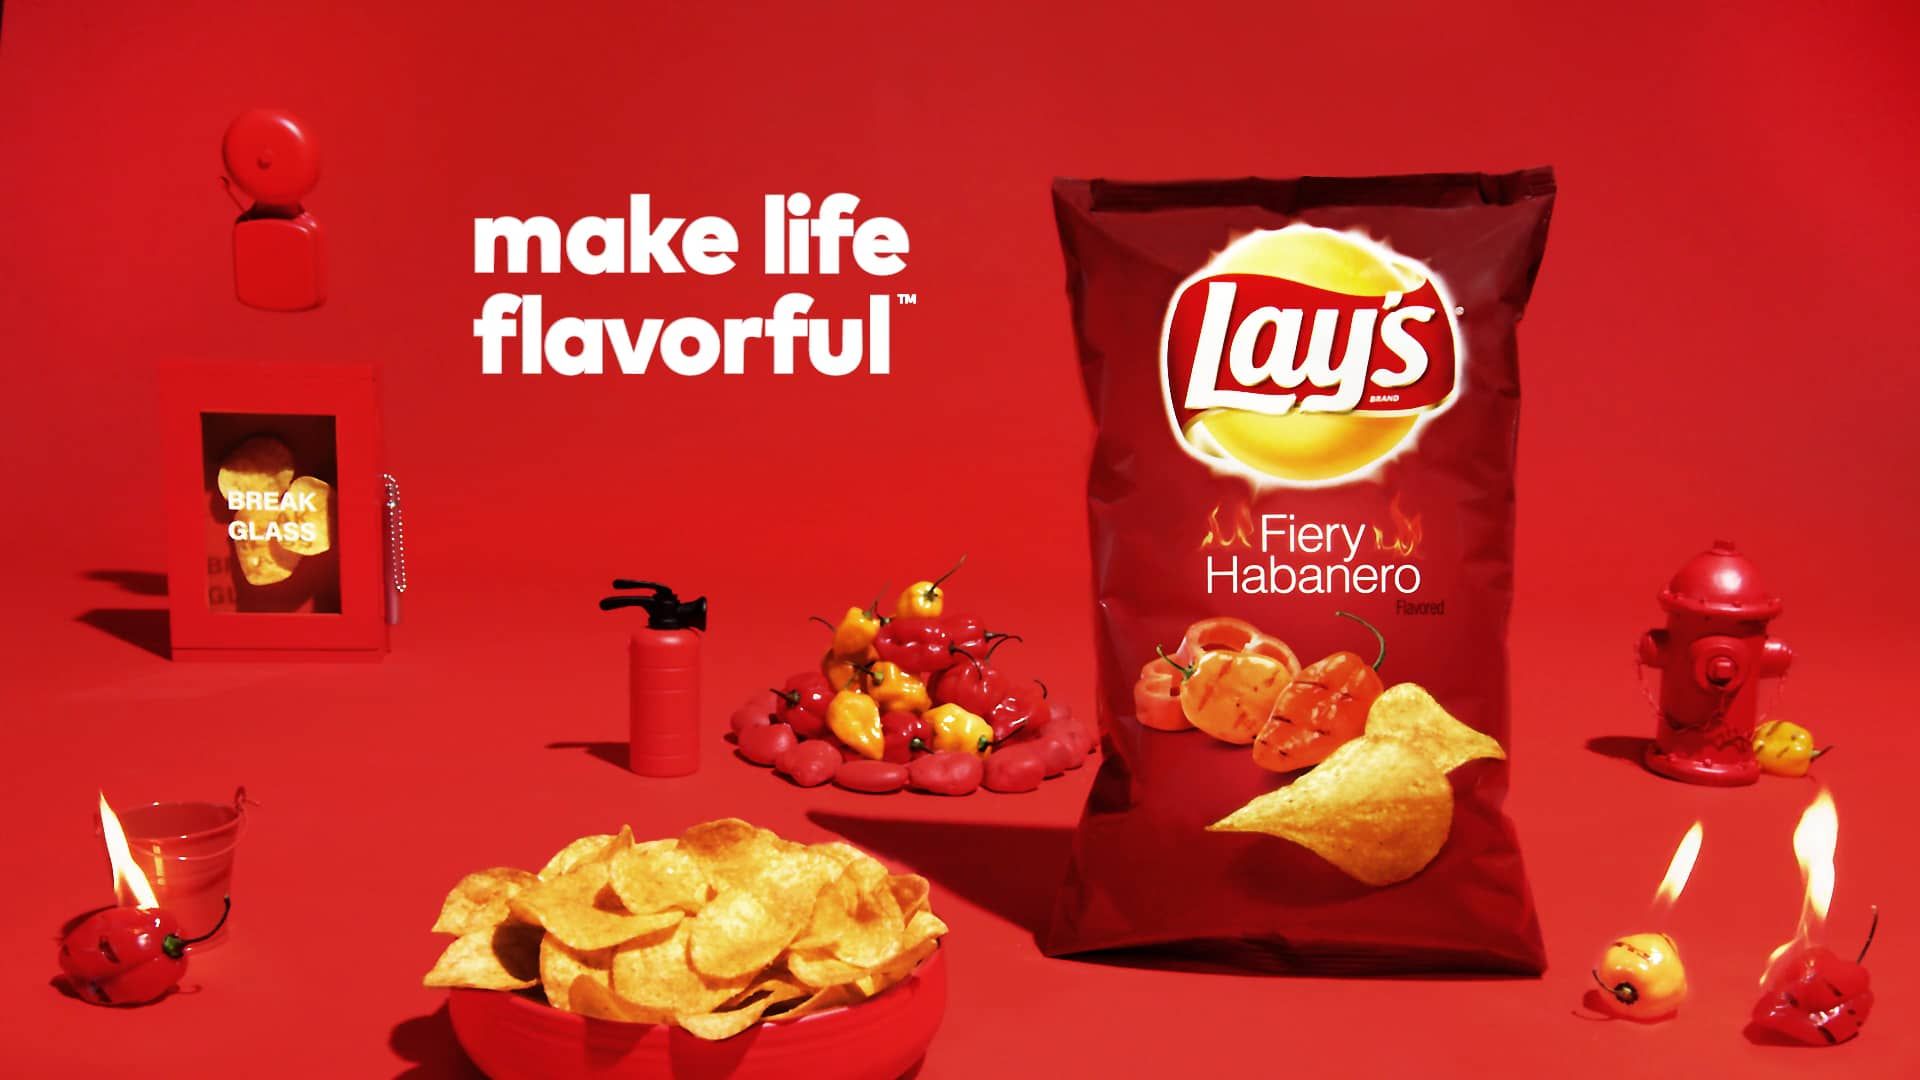 lays #fritolay #potatochips #chips #snacks #fiery #fire #flamin #spicy #monochromatic #stilllife #photography #red. Chips, Flavors, Potato chips